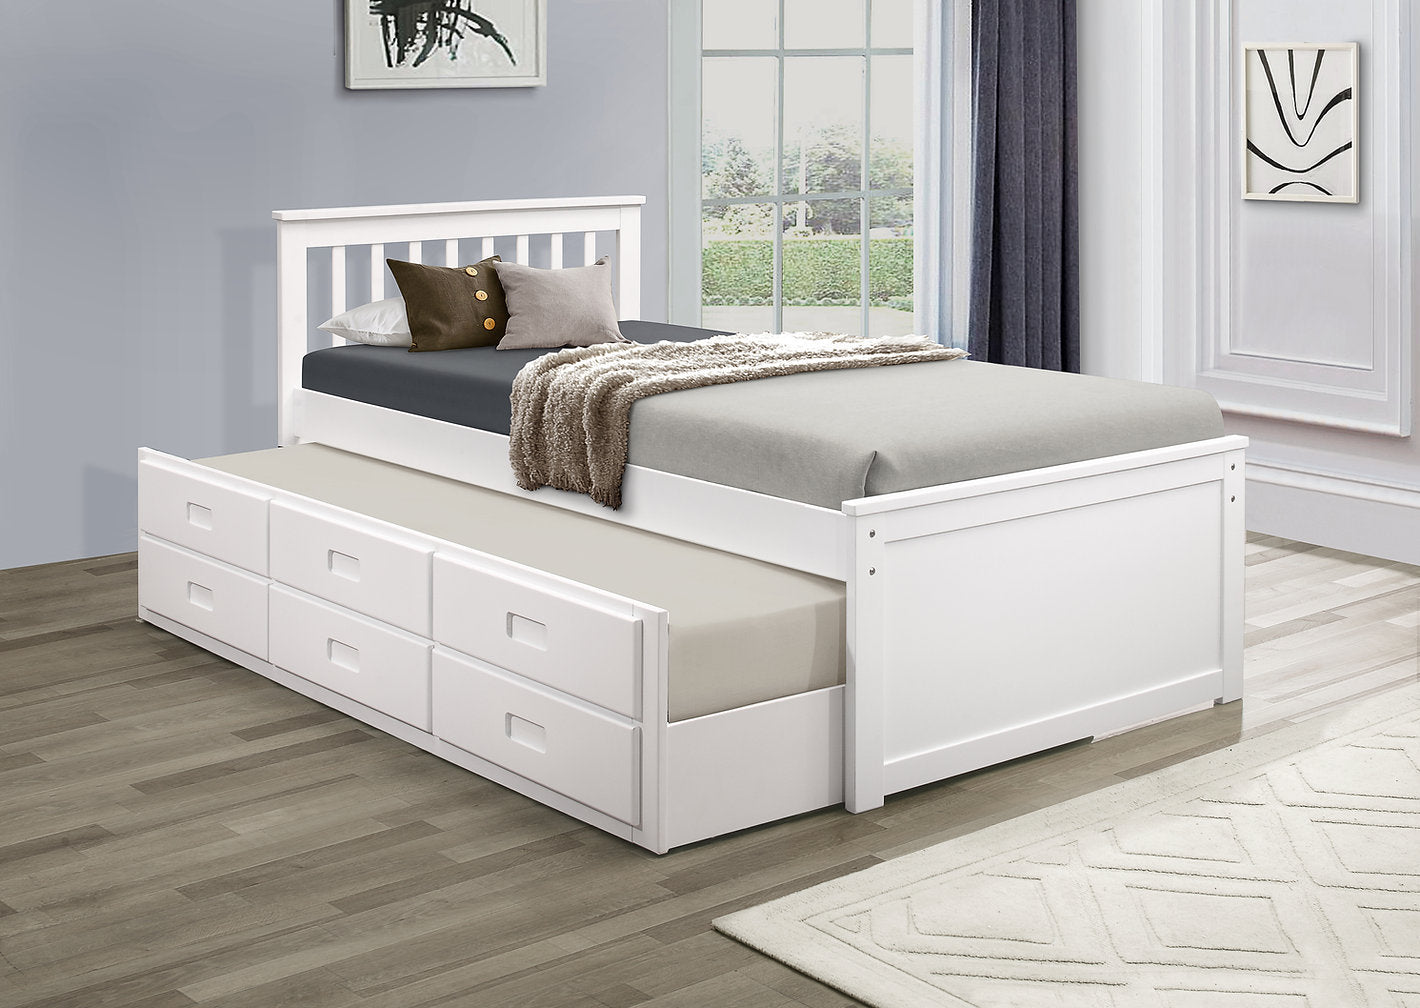 IF-300-W Twin/Twin Captain Bed (White) with Pull-Out Trundle Bed and 3 Pull-Out Drawers by International Furniture